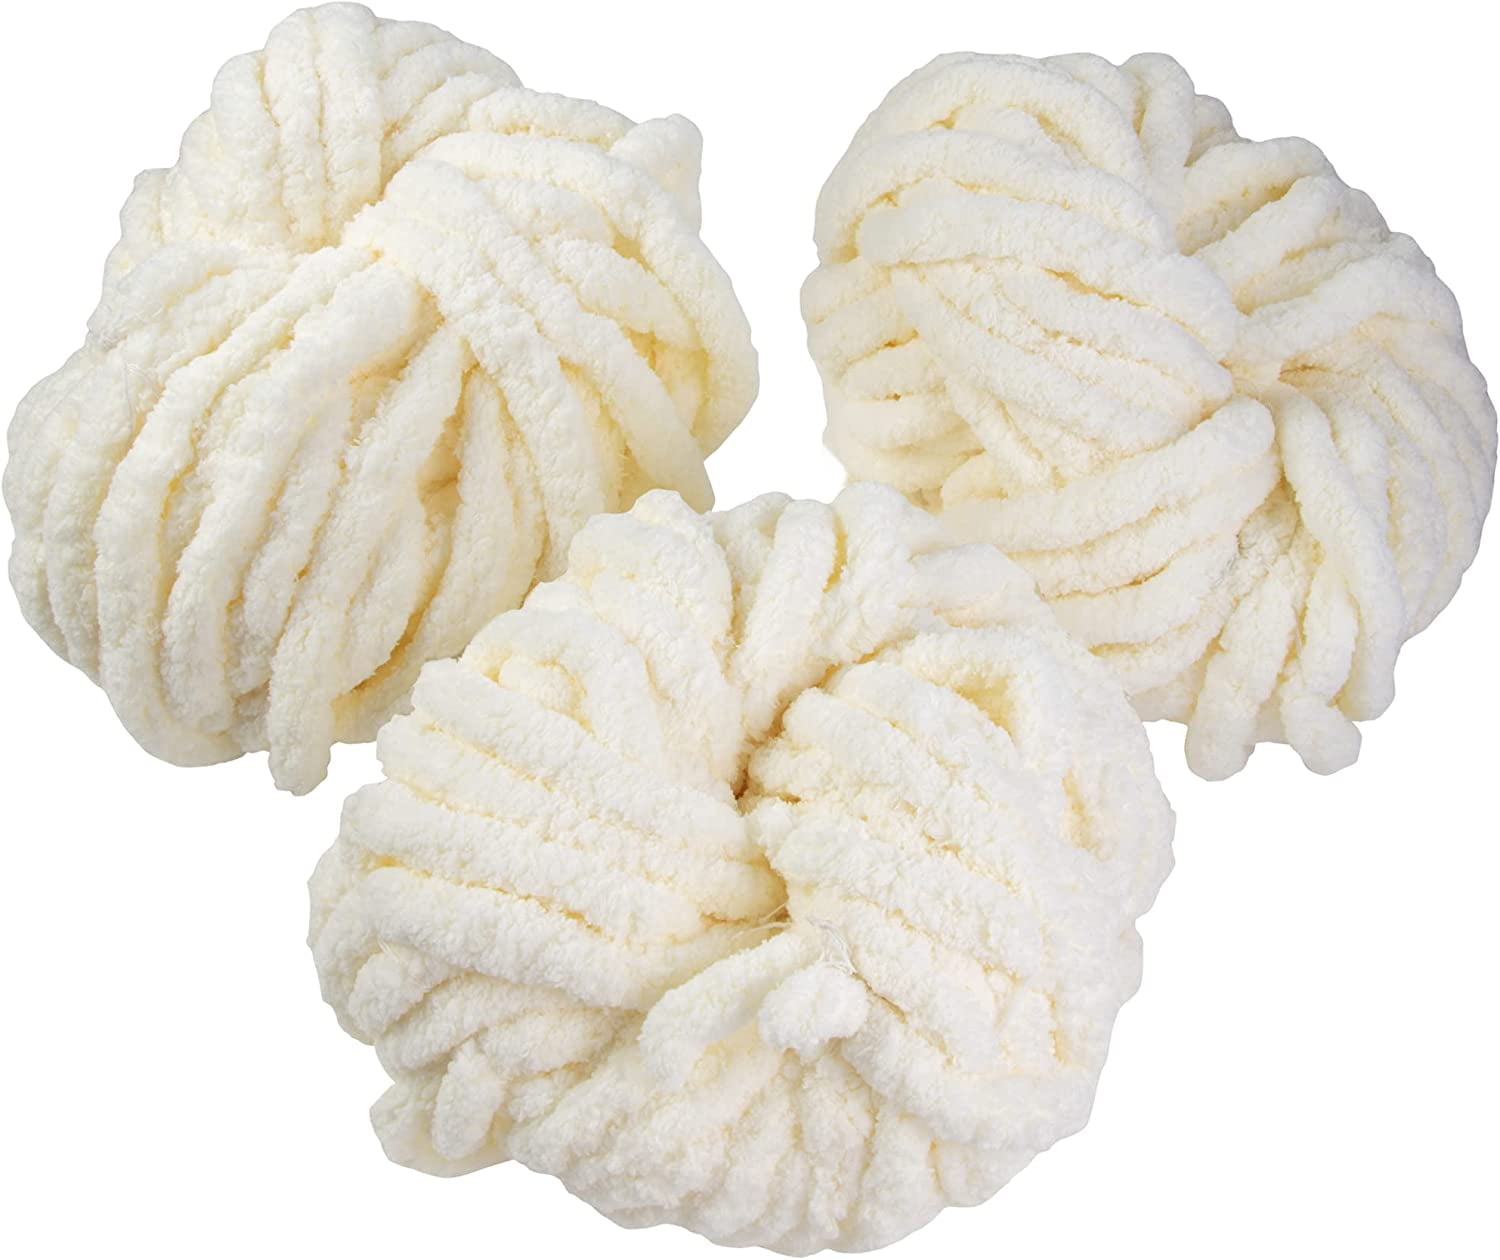 iDIY Chunky Yarn 3 Pack (24 Yards Each Skein) - Cream - Fluffy Chenille Yarn  Perfect for Soft Throw and Baby Blankets, Arm Knitting, Crocheting and DIY  Crafts and Projects! 